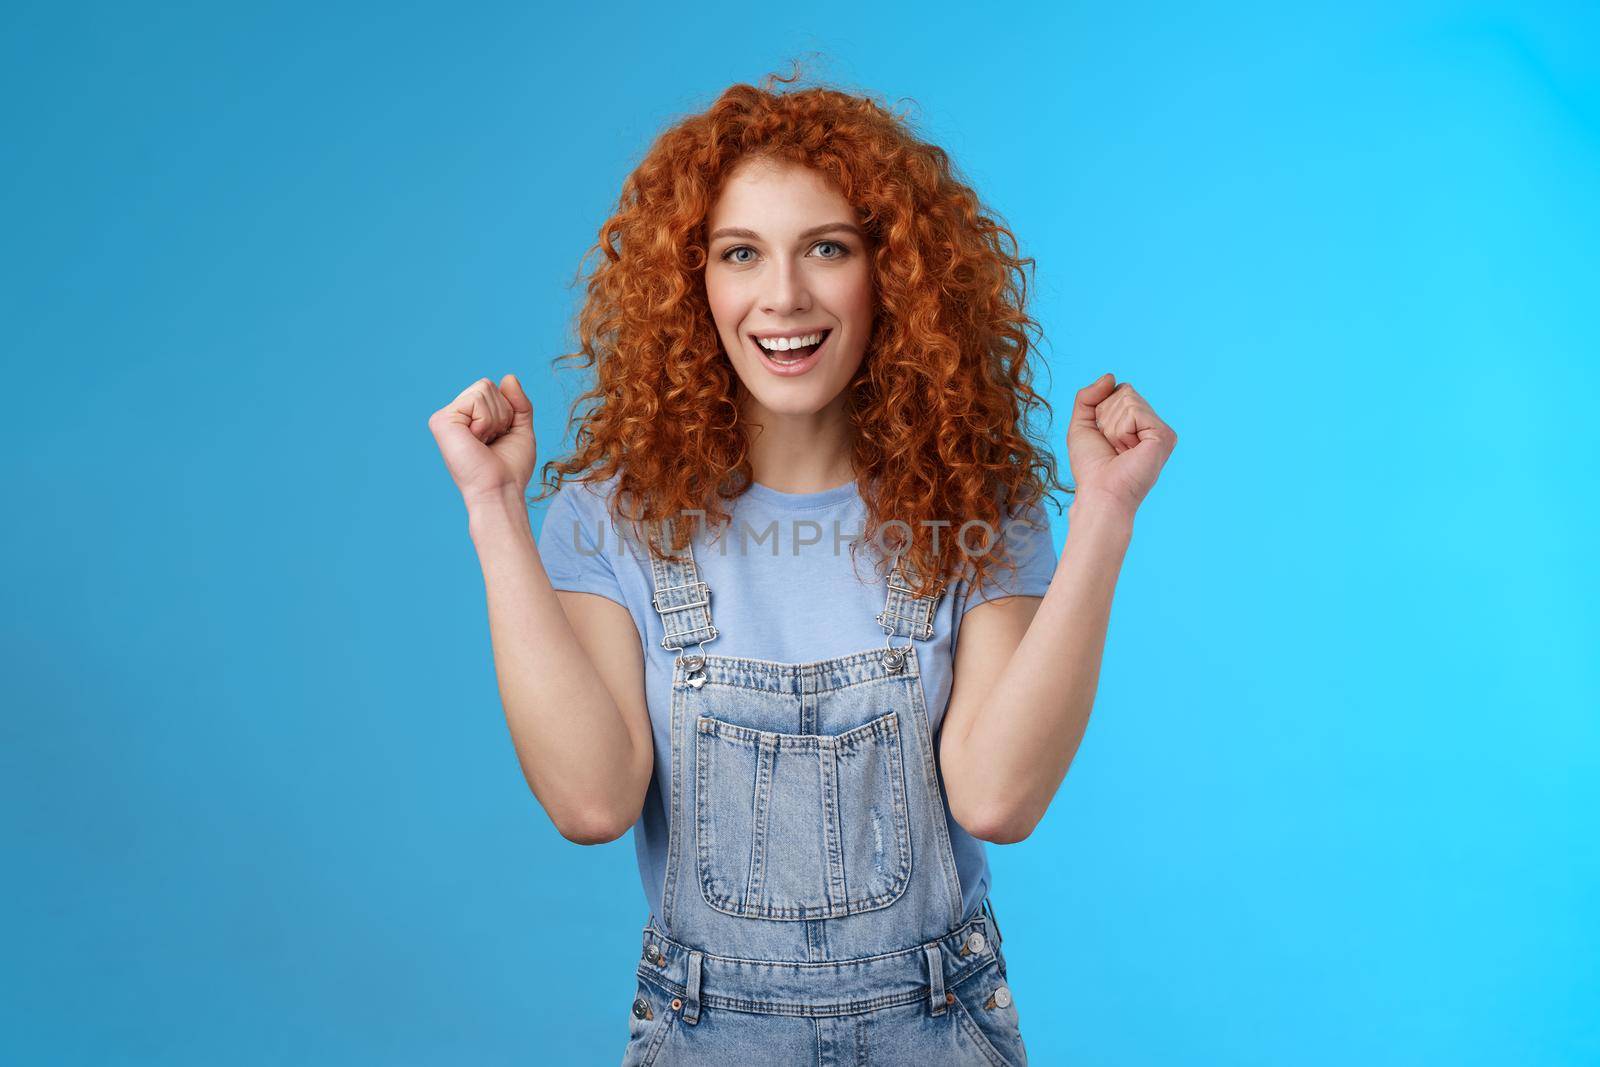 Hooray successful day. Cheerful chrismastic redhead girl summer dungarees clench fists joyfully smiling broadly determined achieve success, triumphing winning game standing upbeat blue background.